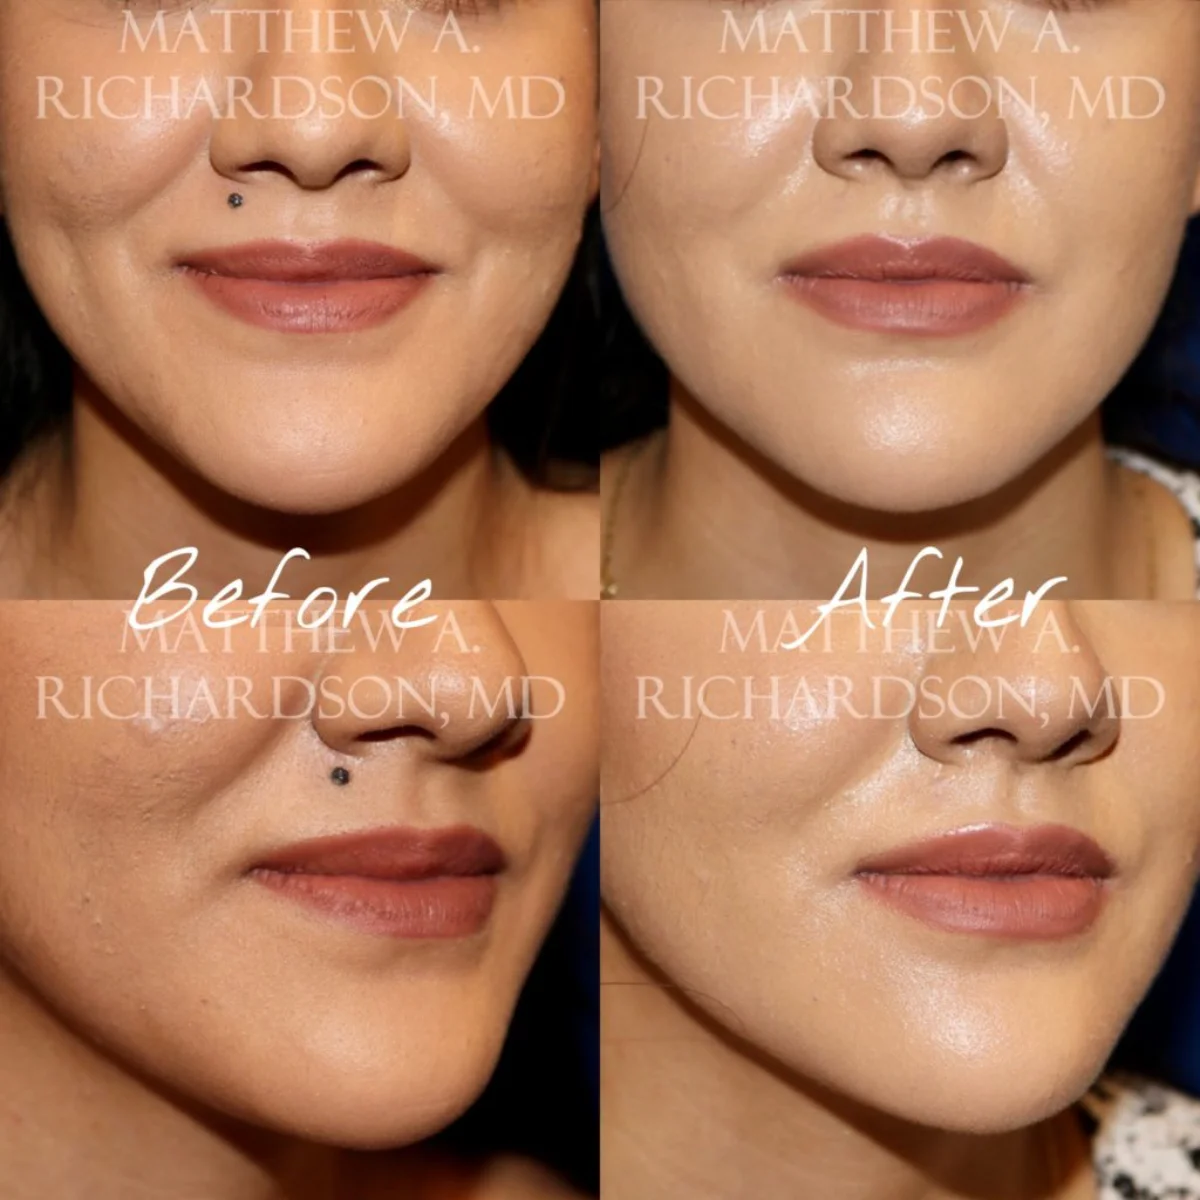 Mole removal before and After Performed by Matthew A. Richardson, MD